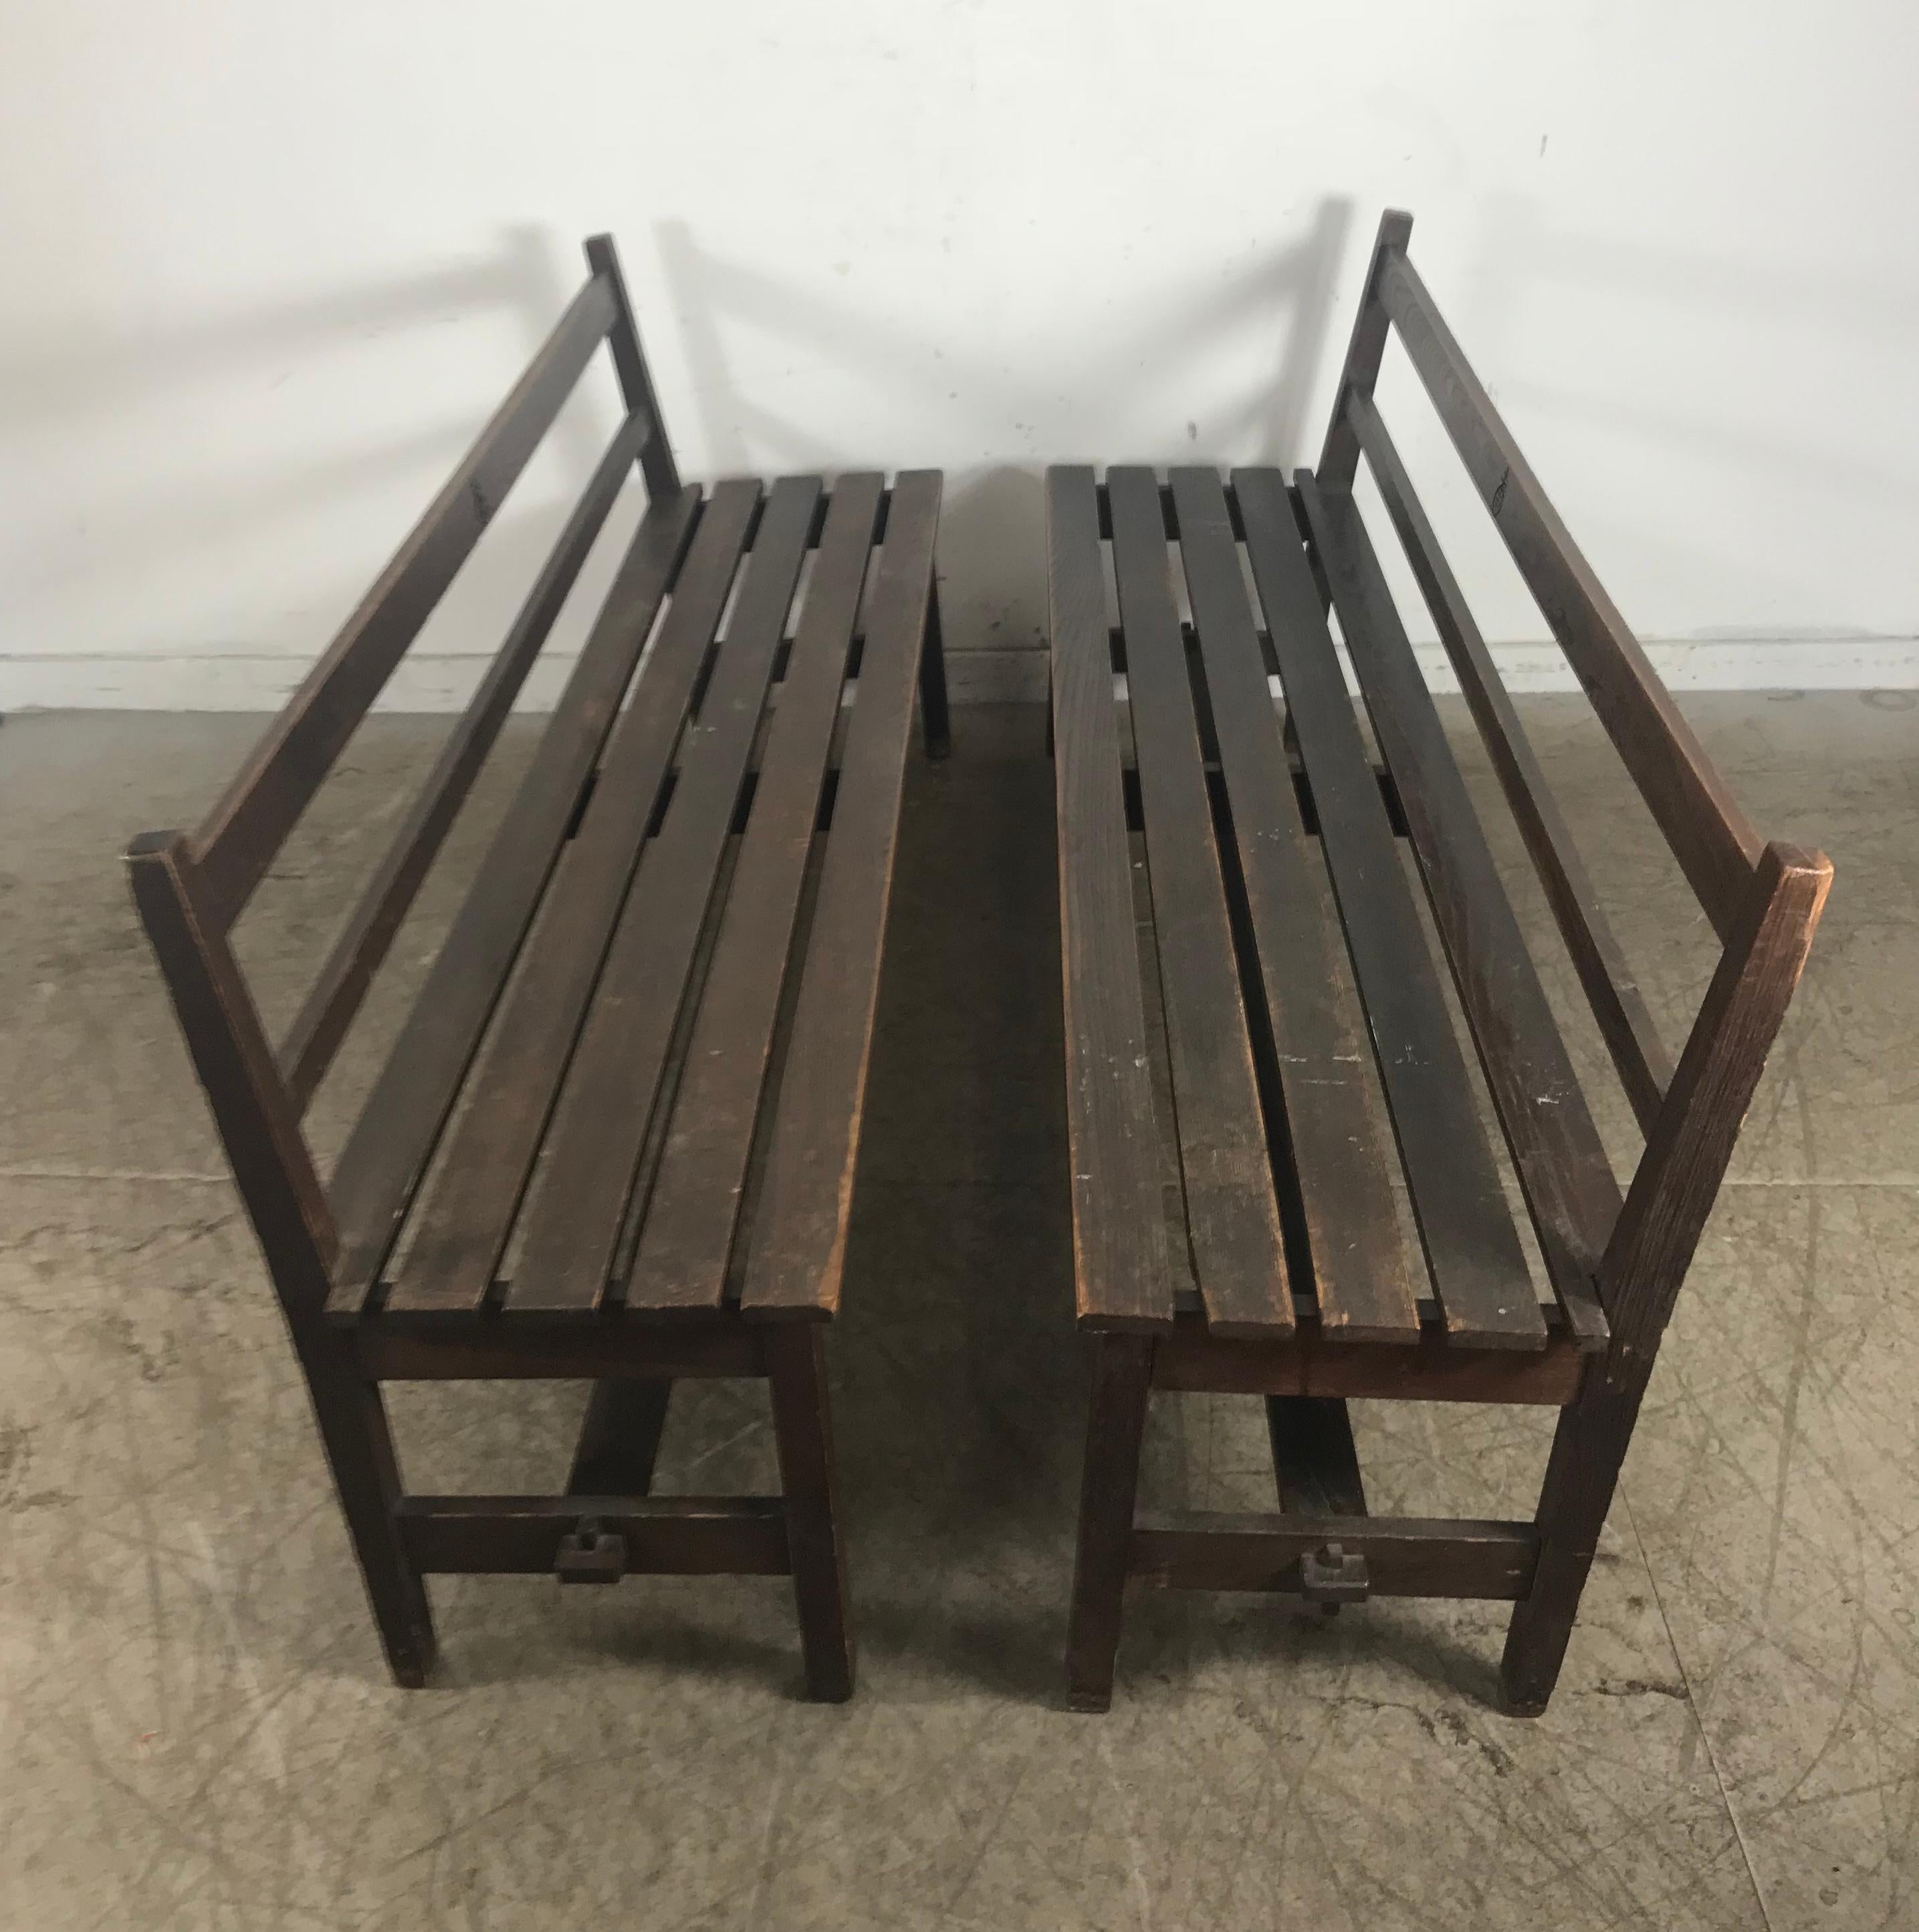 Rare Pair of Roycroft Oak Benches, Inventory Number from the Inn, circa 1905 For Sale 2